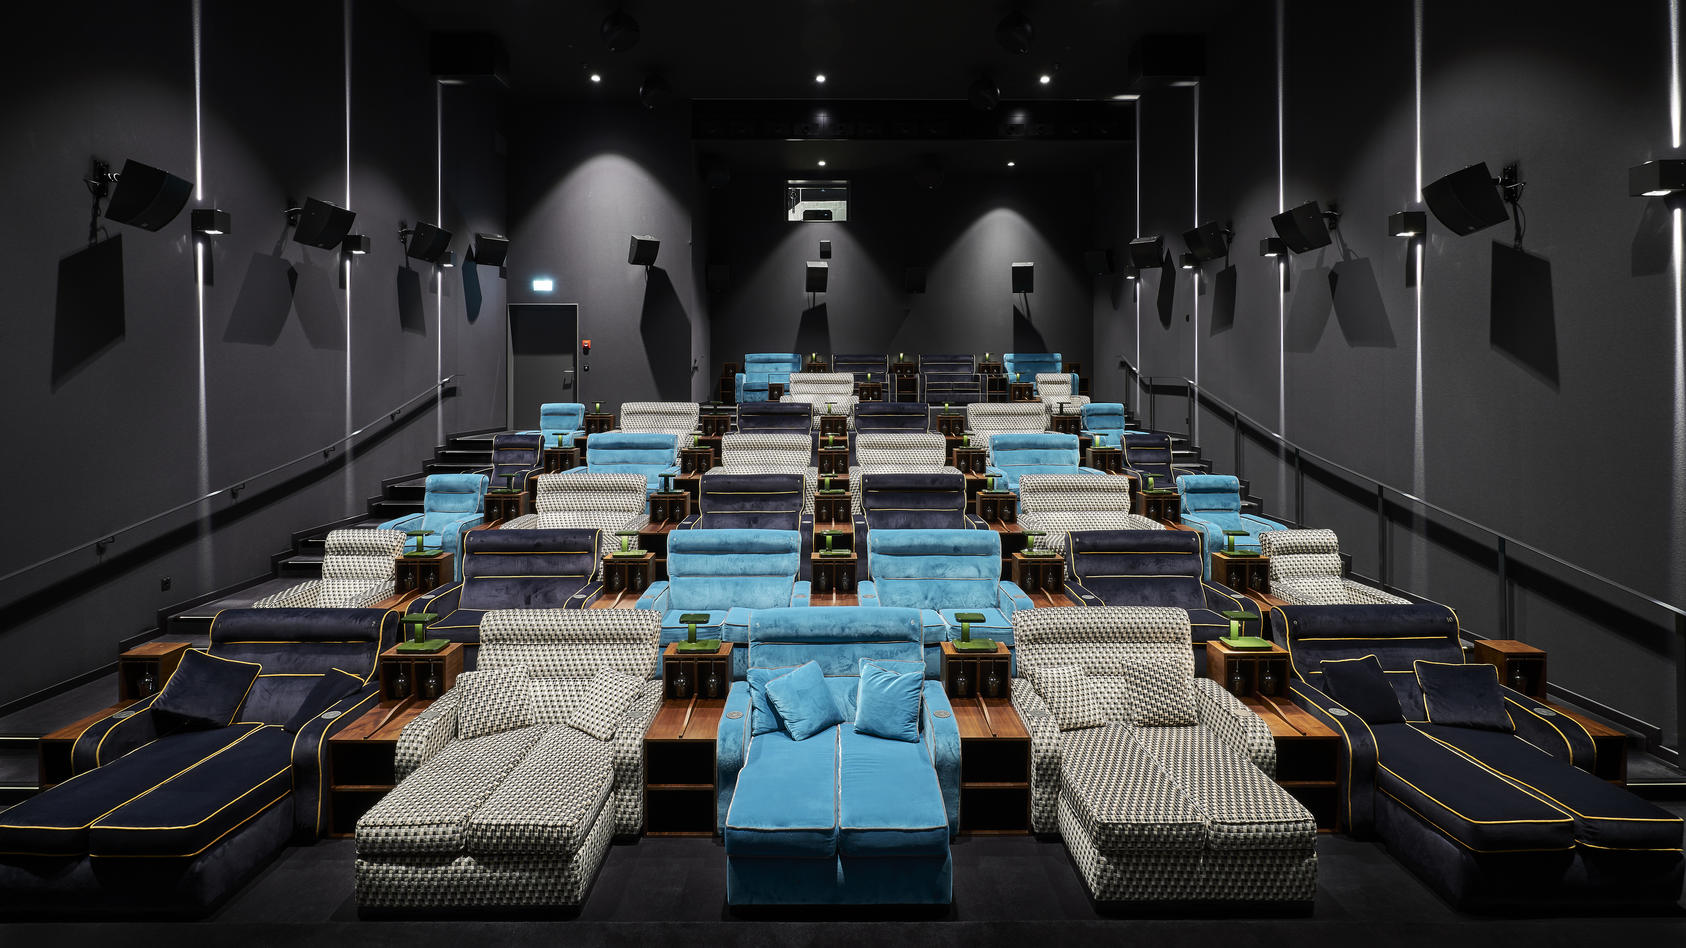 this-movie-theater-has-beds-instead-of-chairs-twitter-has-some-thoughts